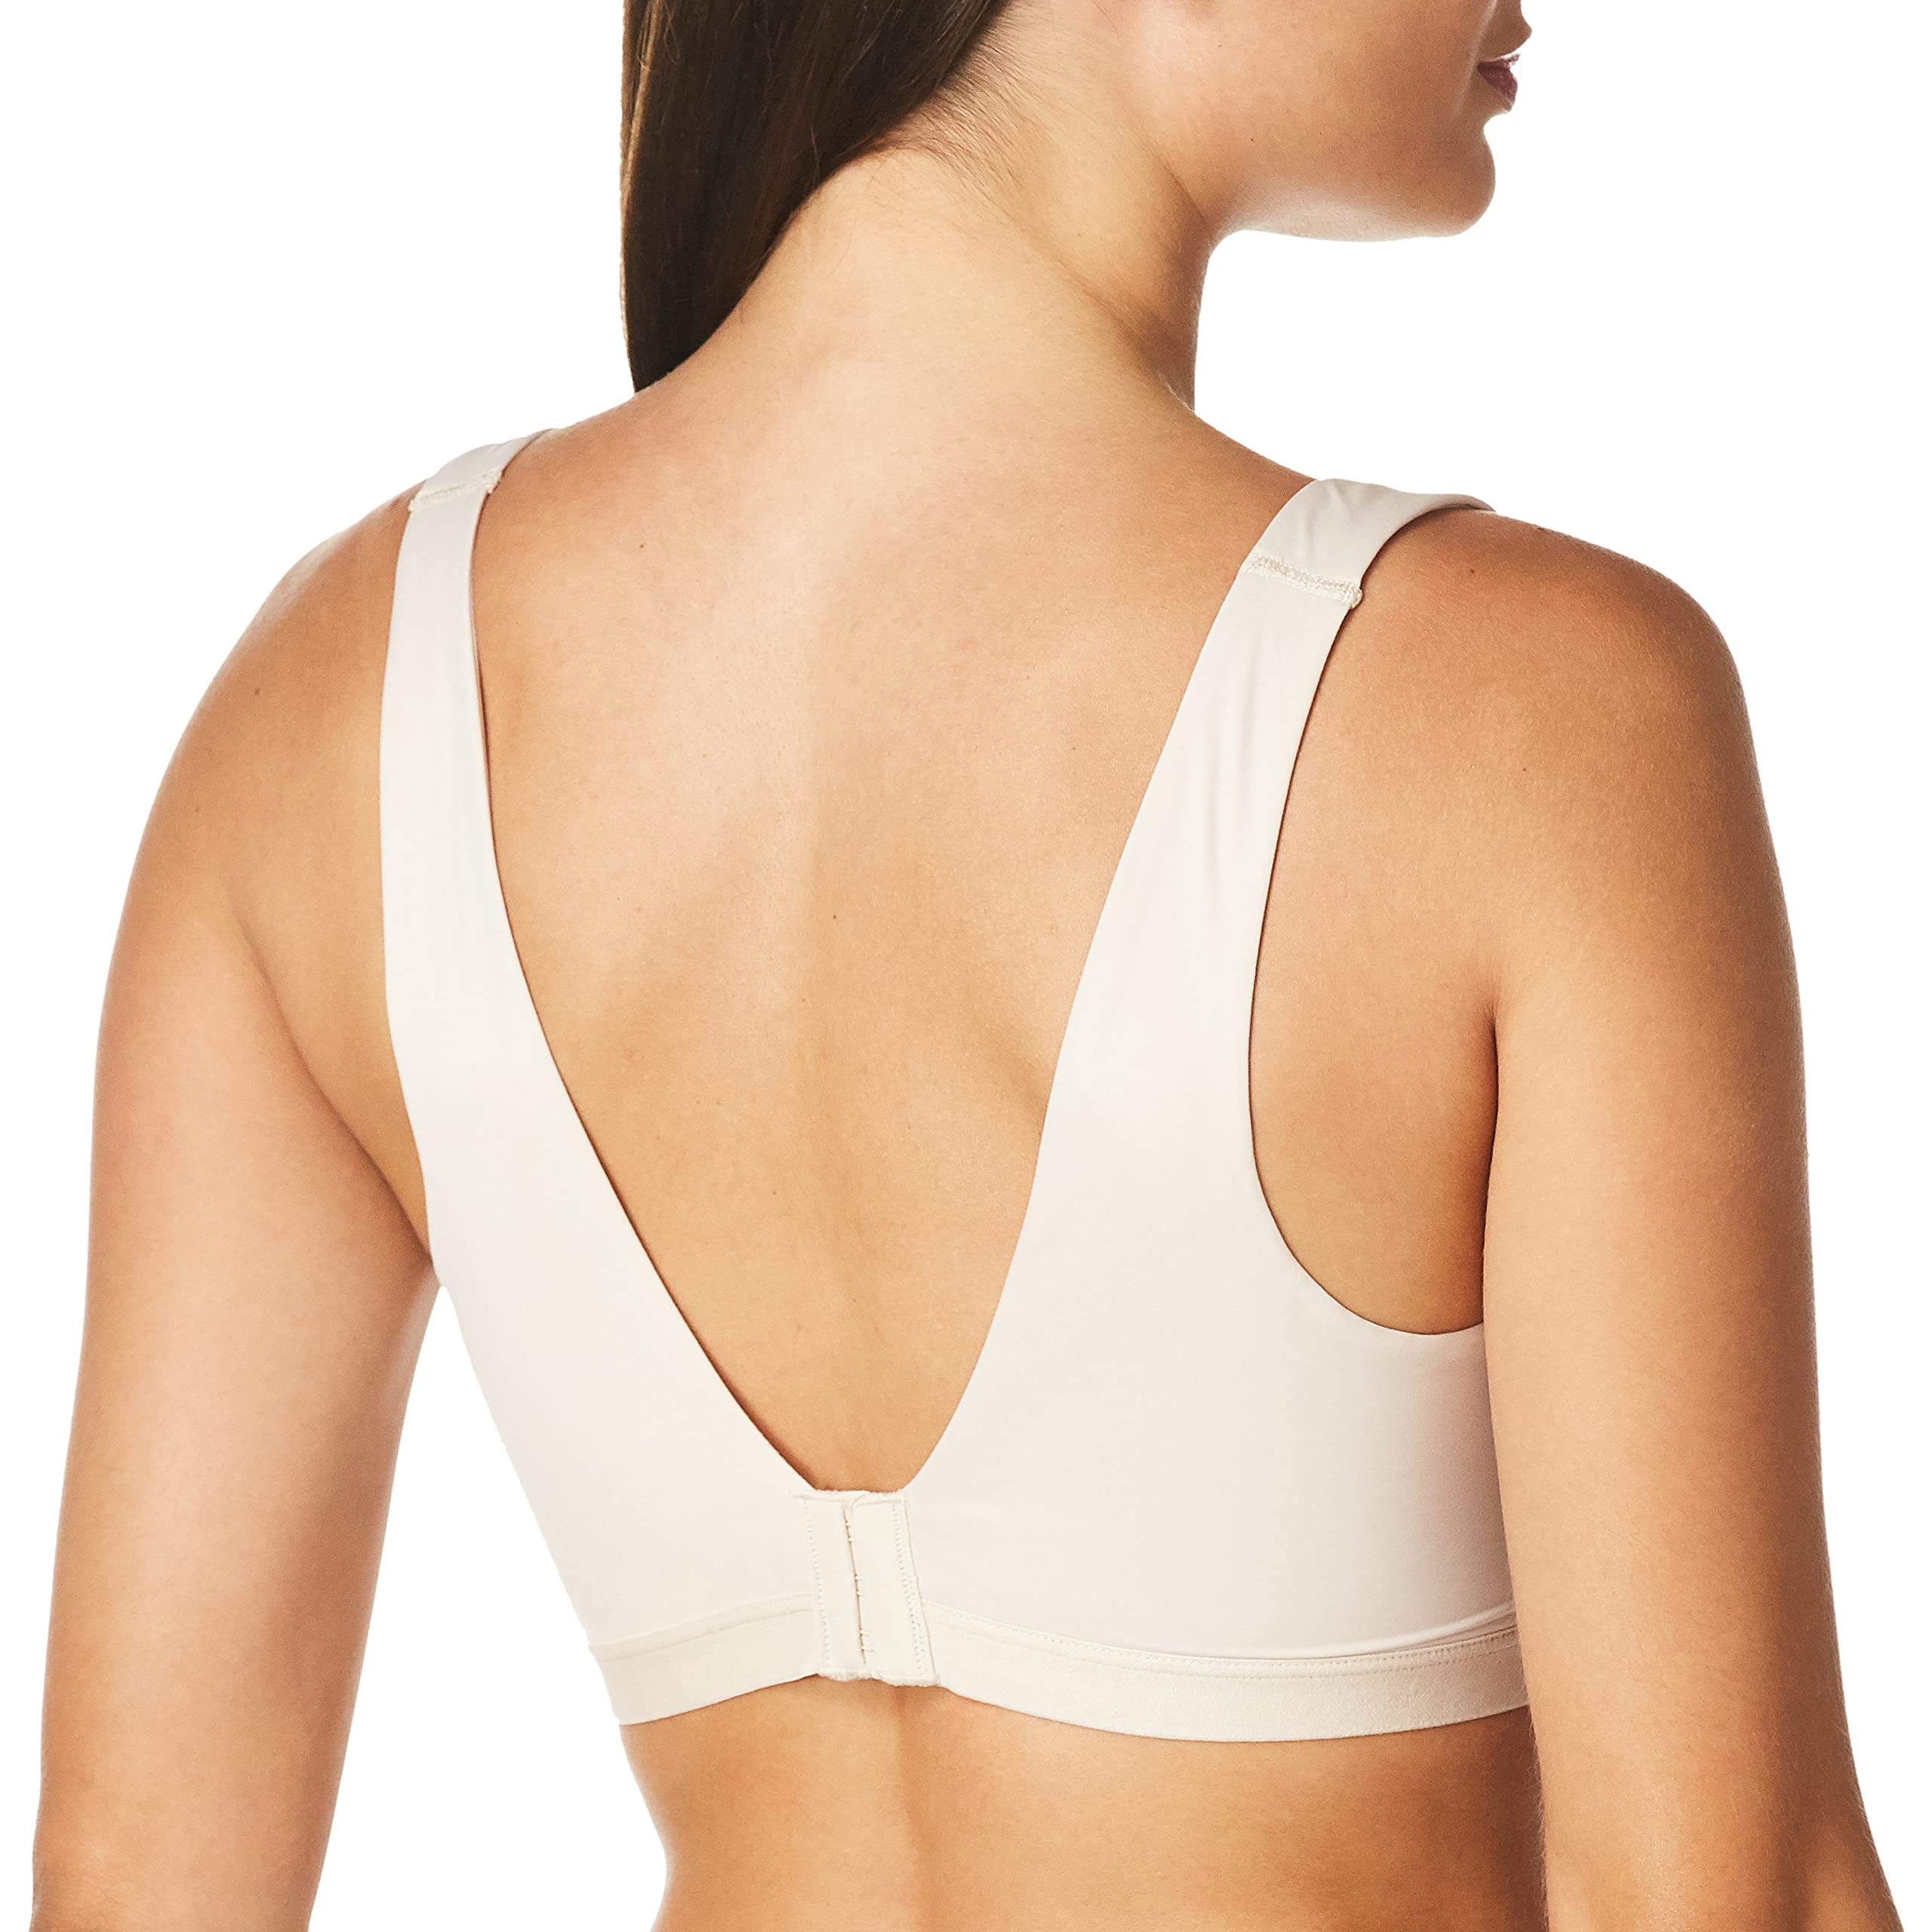 Warner's Women's Cloud 9 Super Soft, Smooth Invisible Look Wireless Lightly Lined Comfort Bra Rm1041a